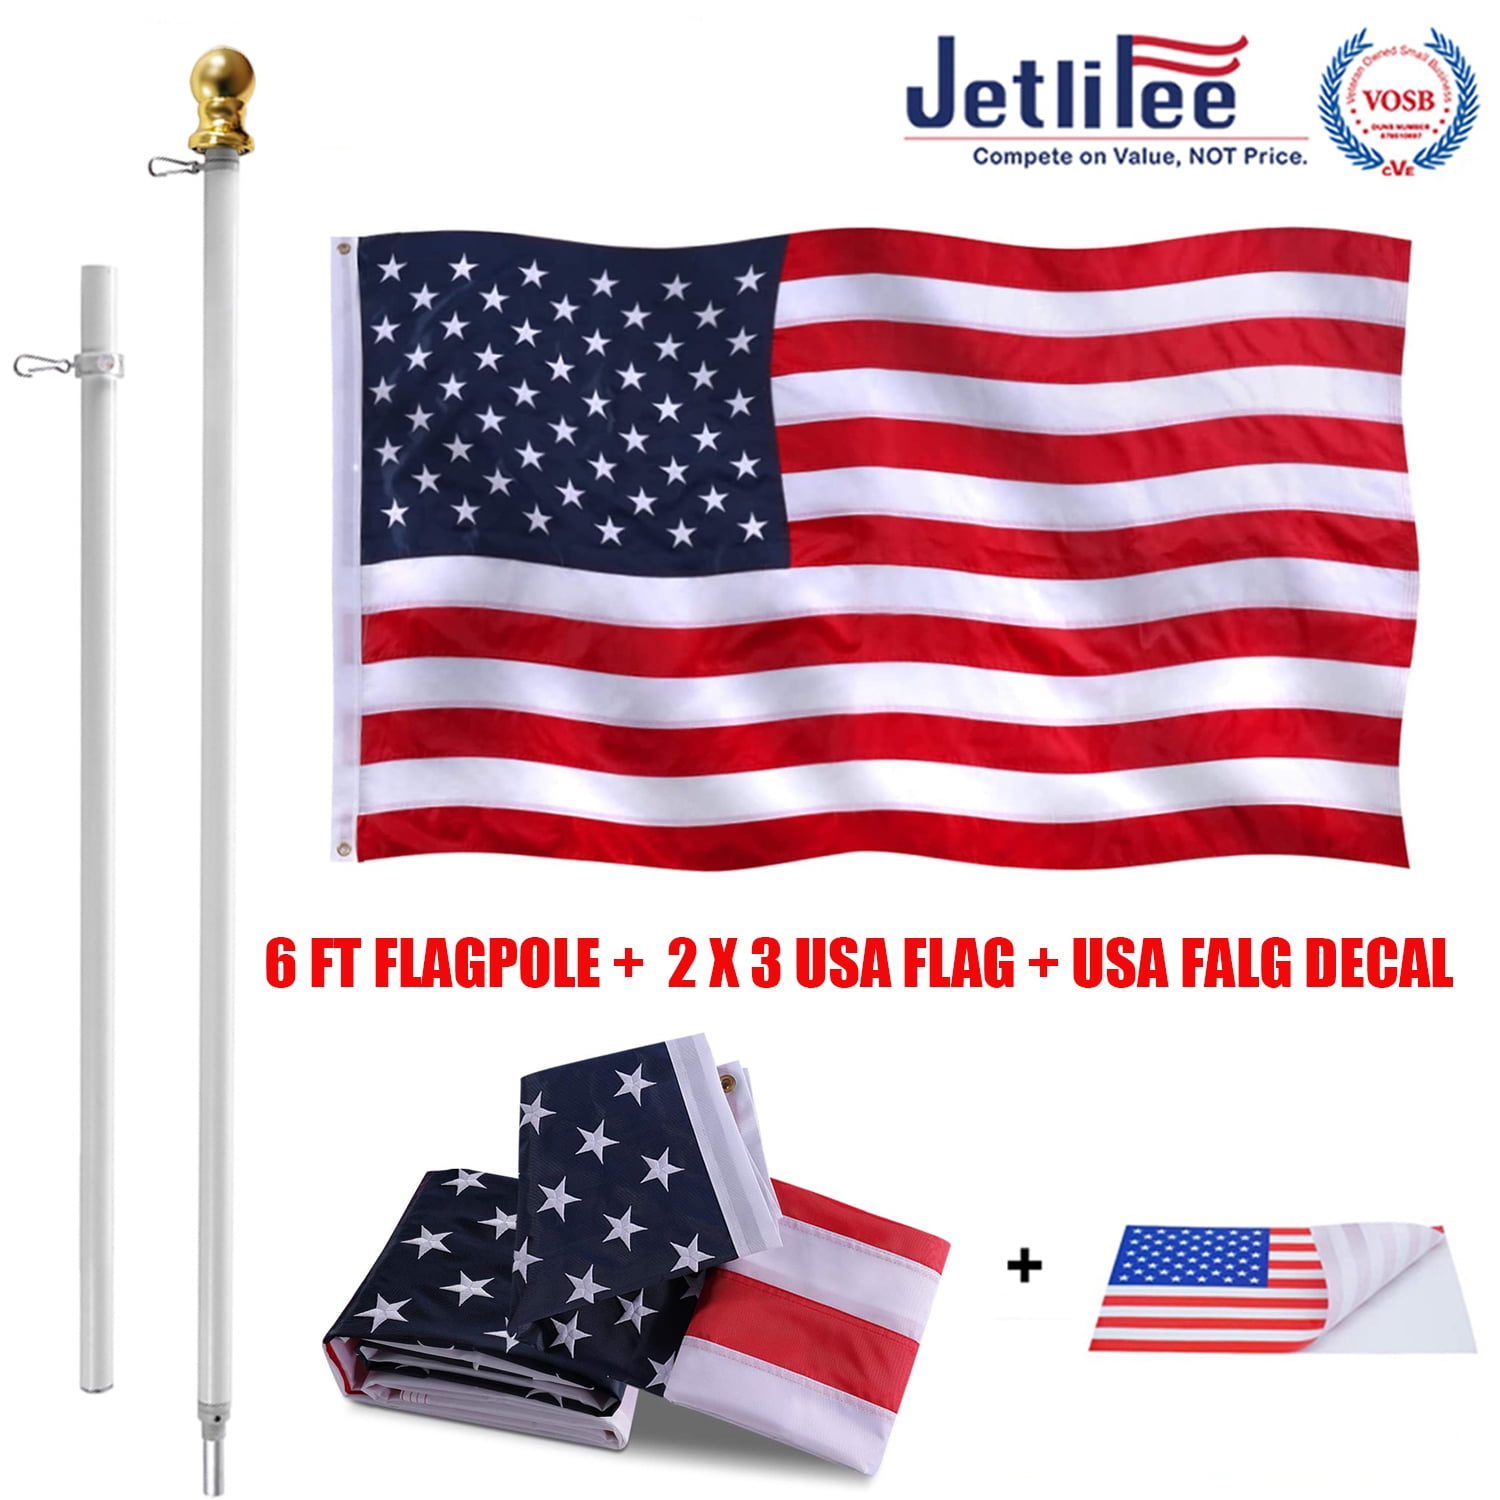 Jetlifee 2x3 Ft American Flag And Flag Pole 6 Ft 360° Free Spinning 100 Polyester 2 By 3 Us Flag